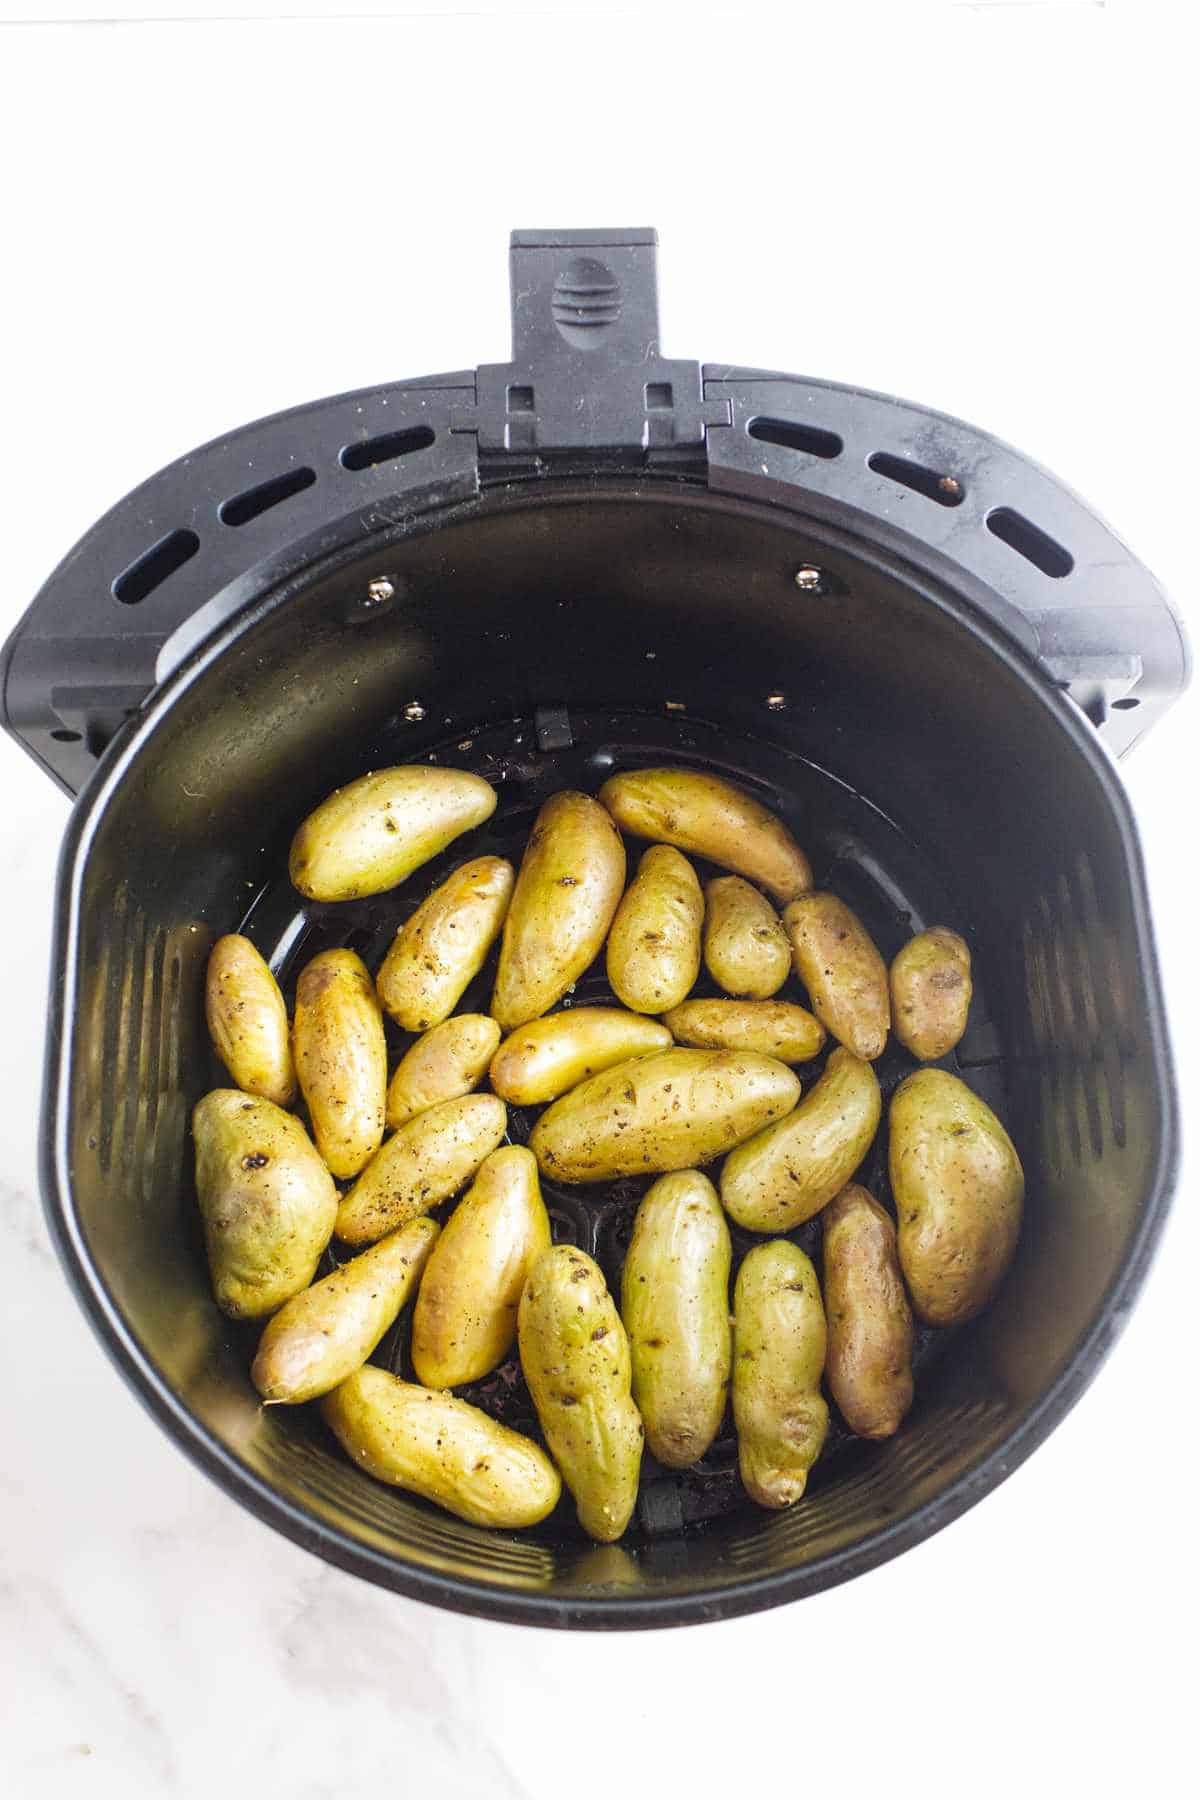 cooked fingerlings in an air frying basket.